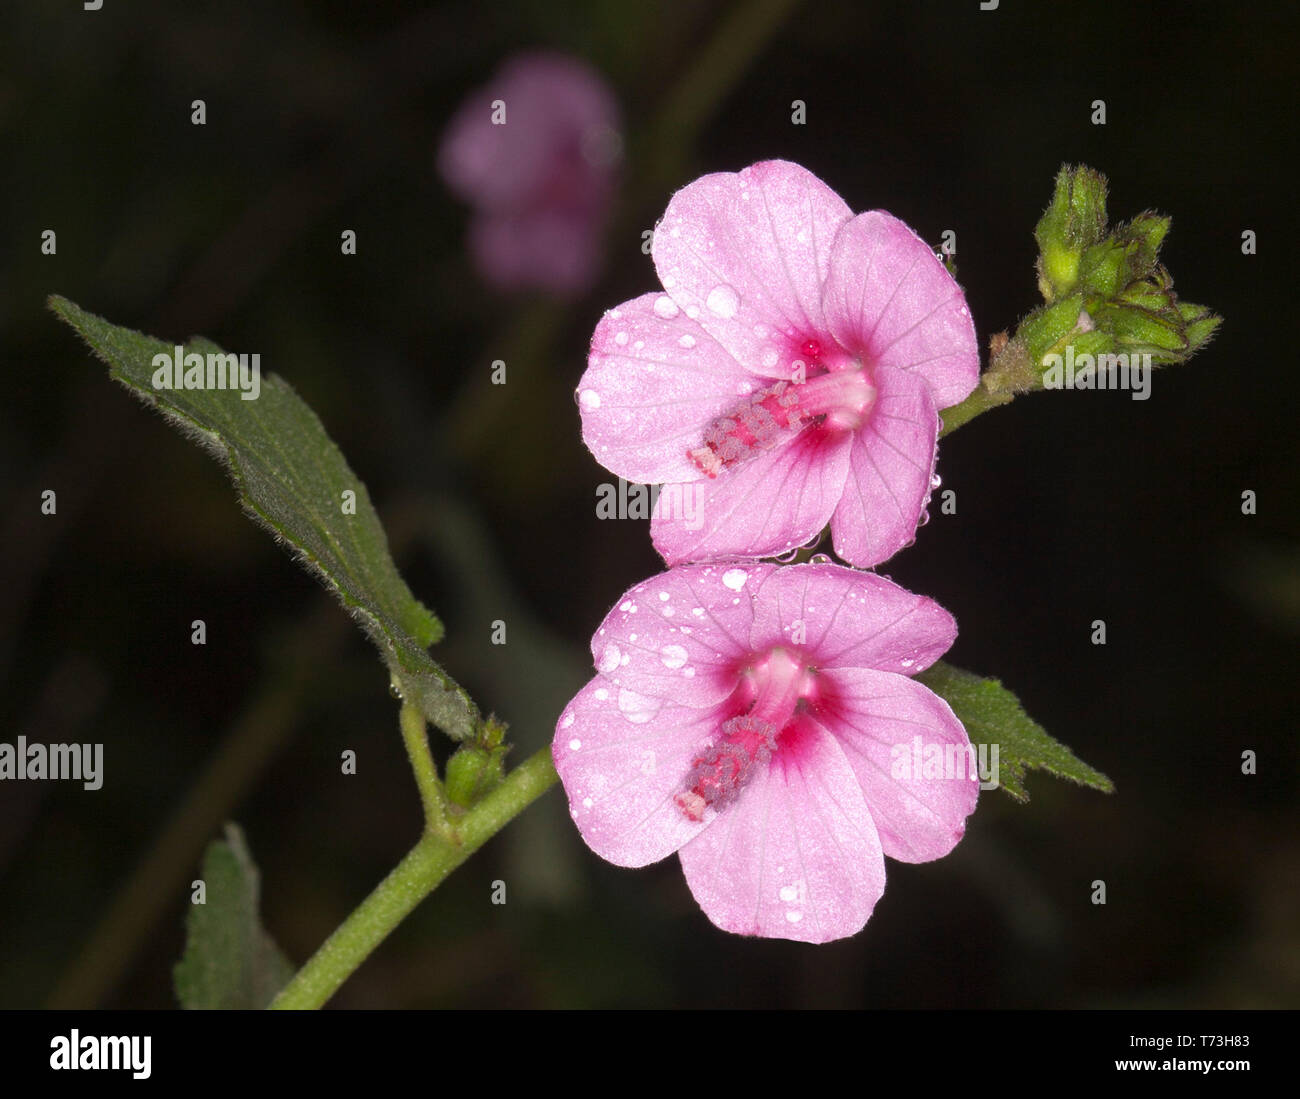 Stunning pink flowers of Australian wildflower Urena lobata, wild hibiscus, with raindrops on petals and green leaves against dark background Stock Photo